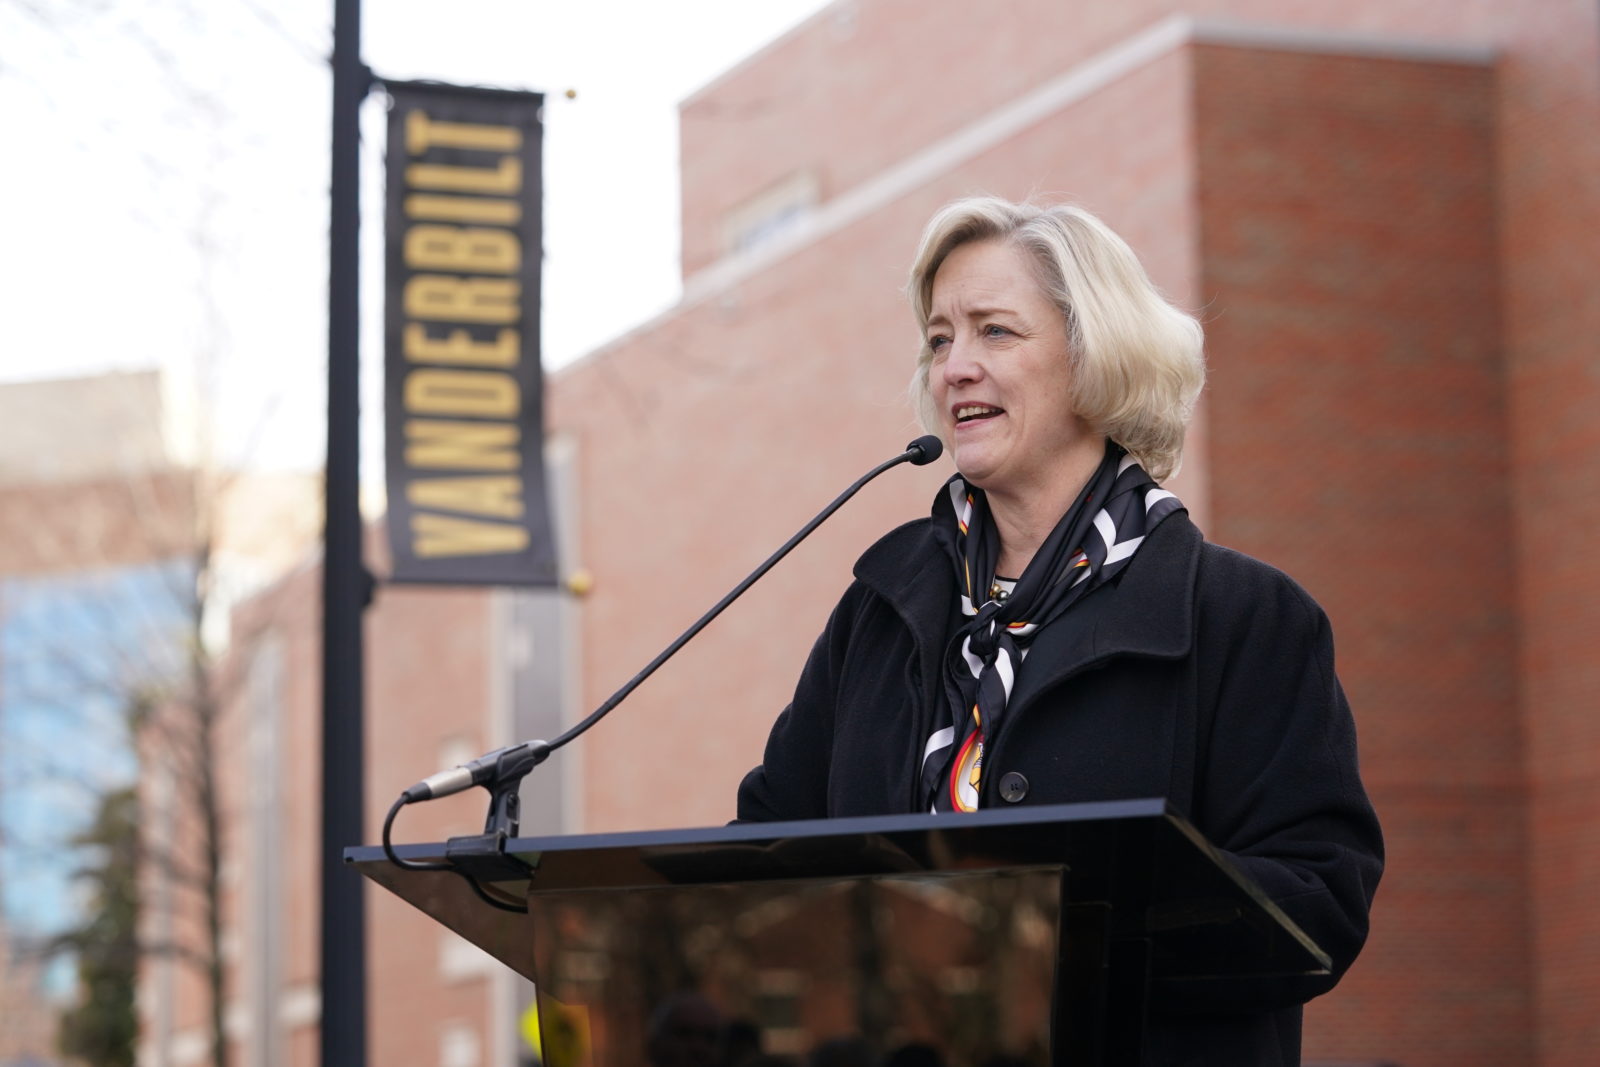 Interim Chancellor and Provost Susan R. Wente speaking at the Perry Wallace Way dedication ceremony on Saturday, February 22. (John Russell/Vanderbilt)